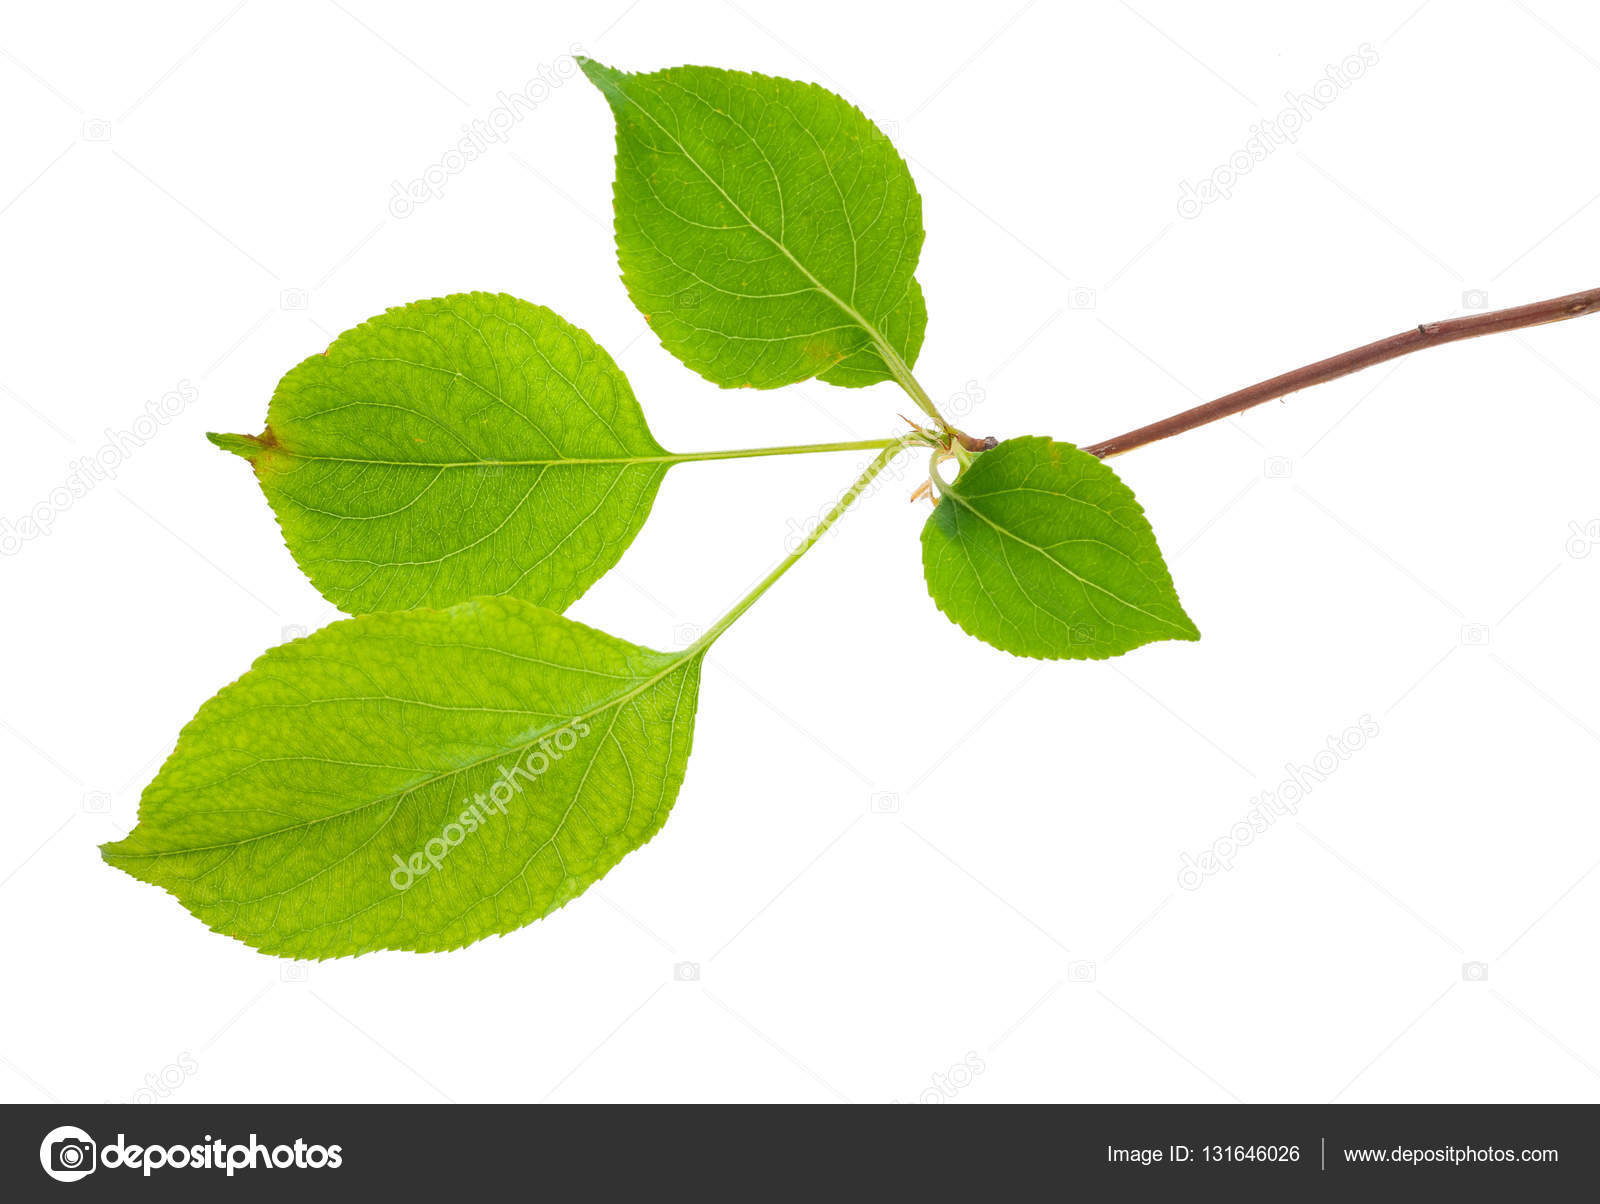 Young apple tree branch — Stock Photo © Alexan66 #131646026